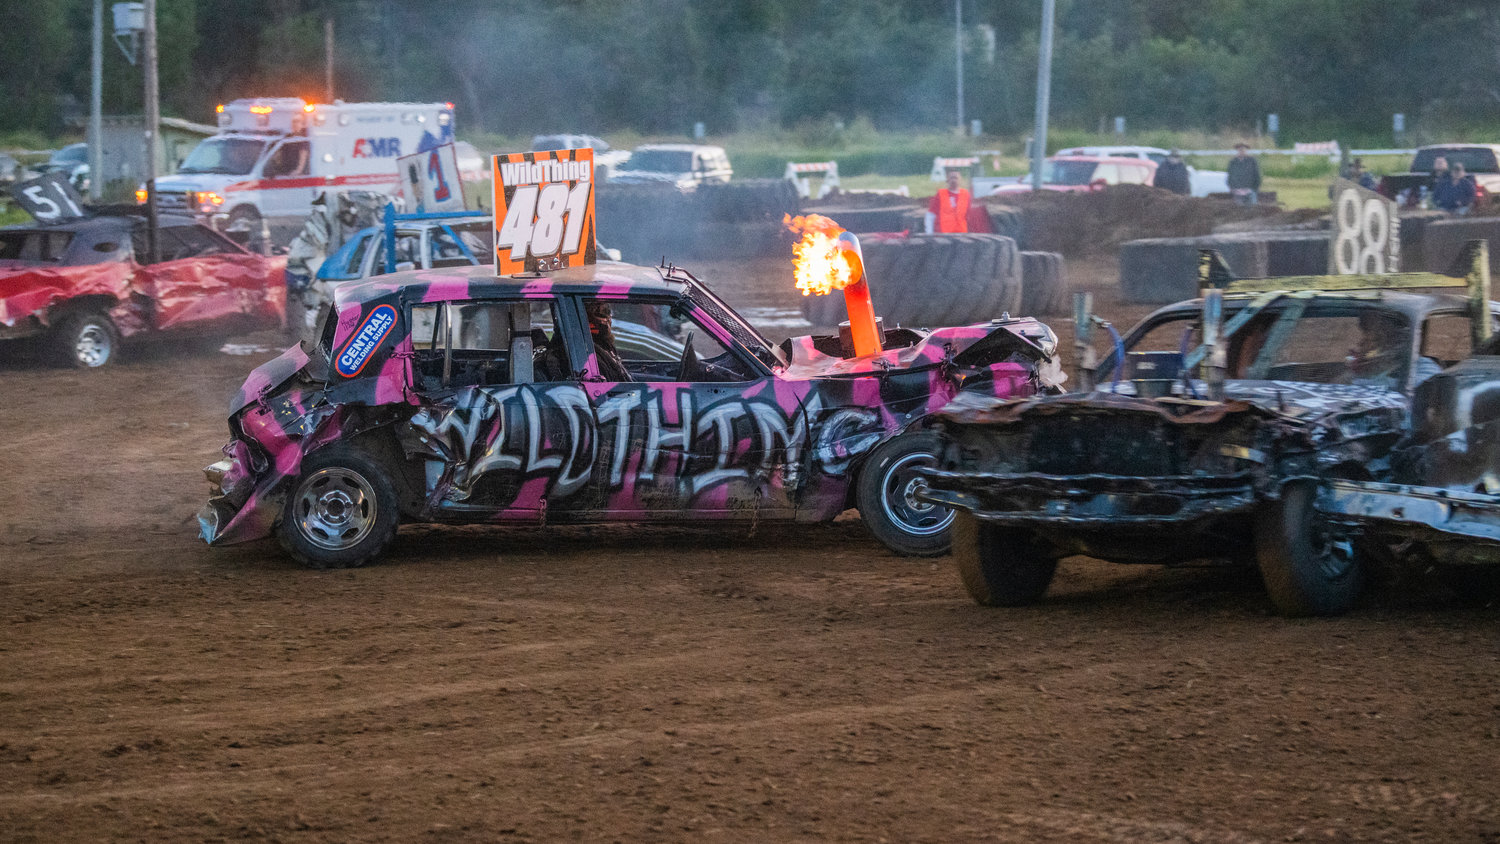 Third place winner "Wild Thing" crashes into the first place winner at the Centralia Summerfest demolition derby at the Southwest Washington Fairgrounds Sunday.